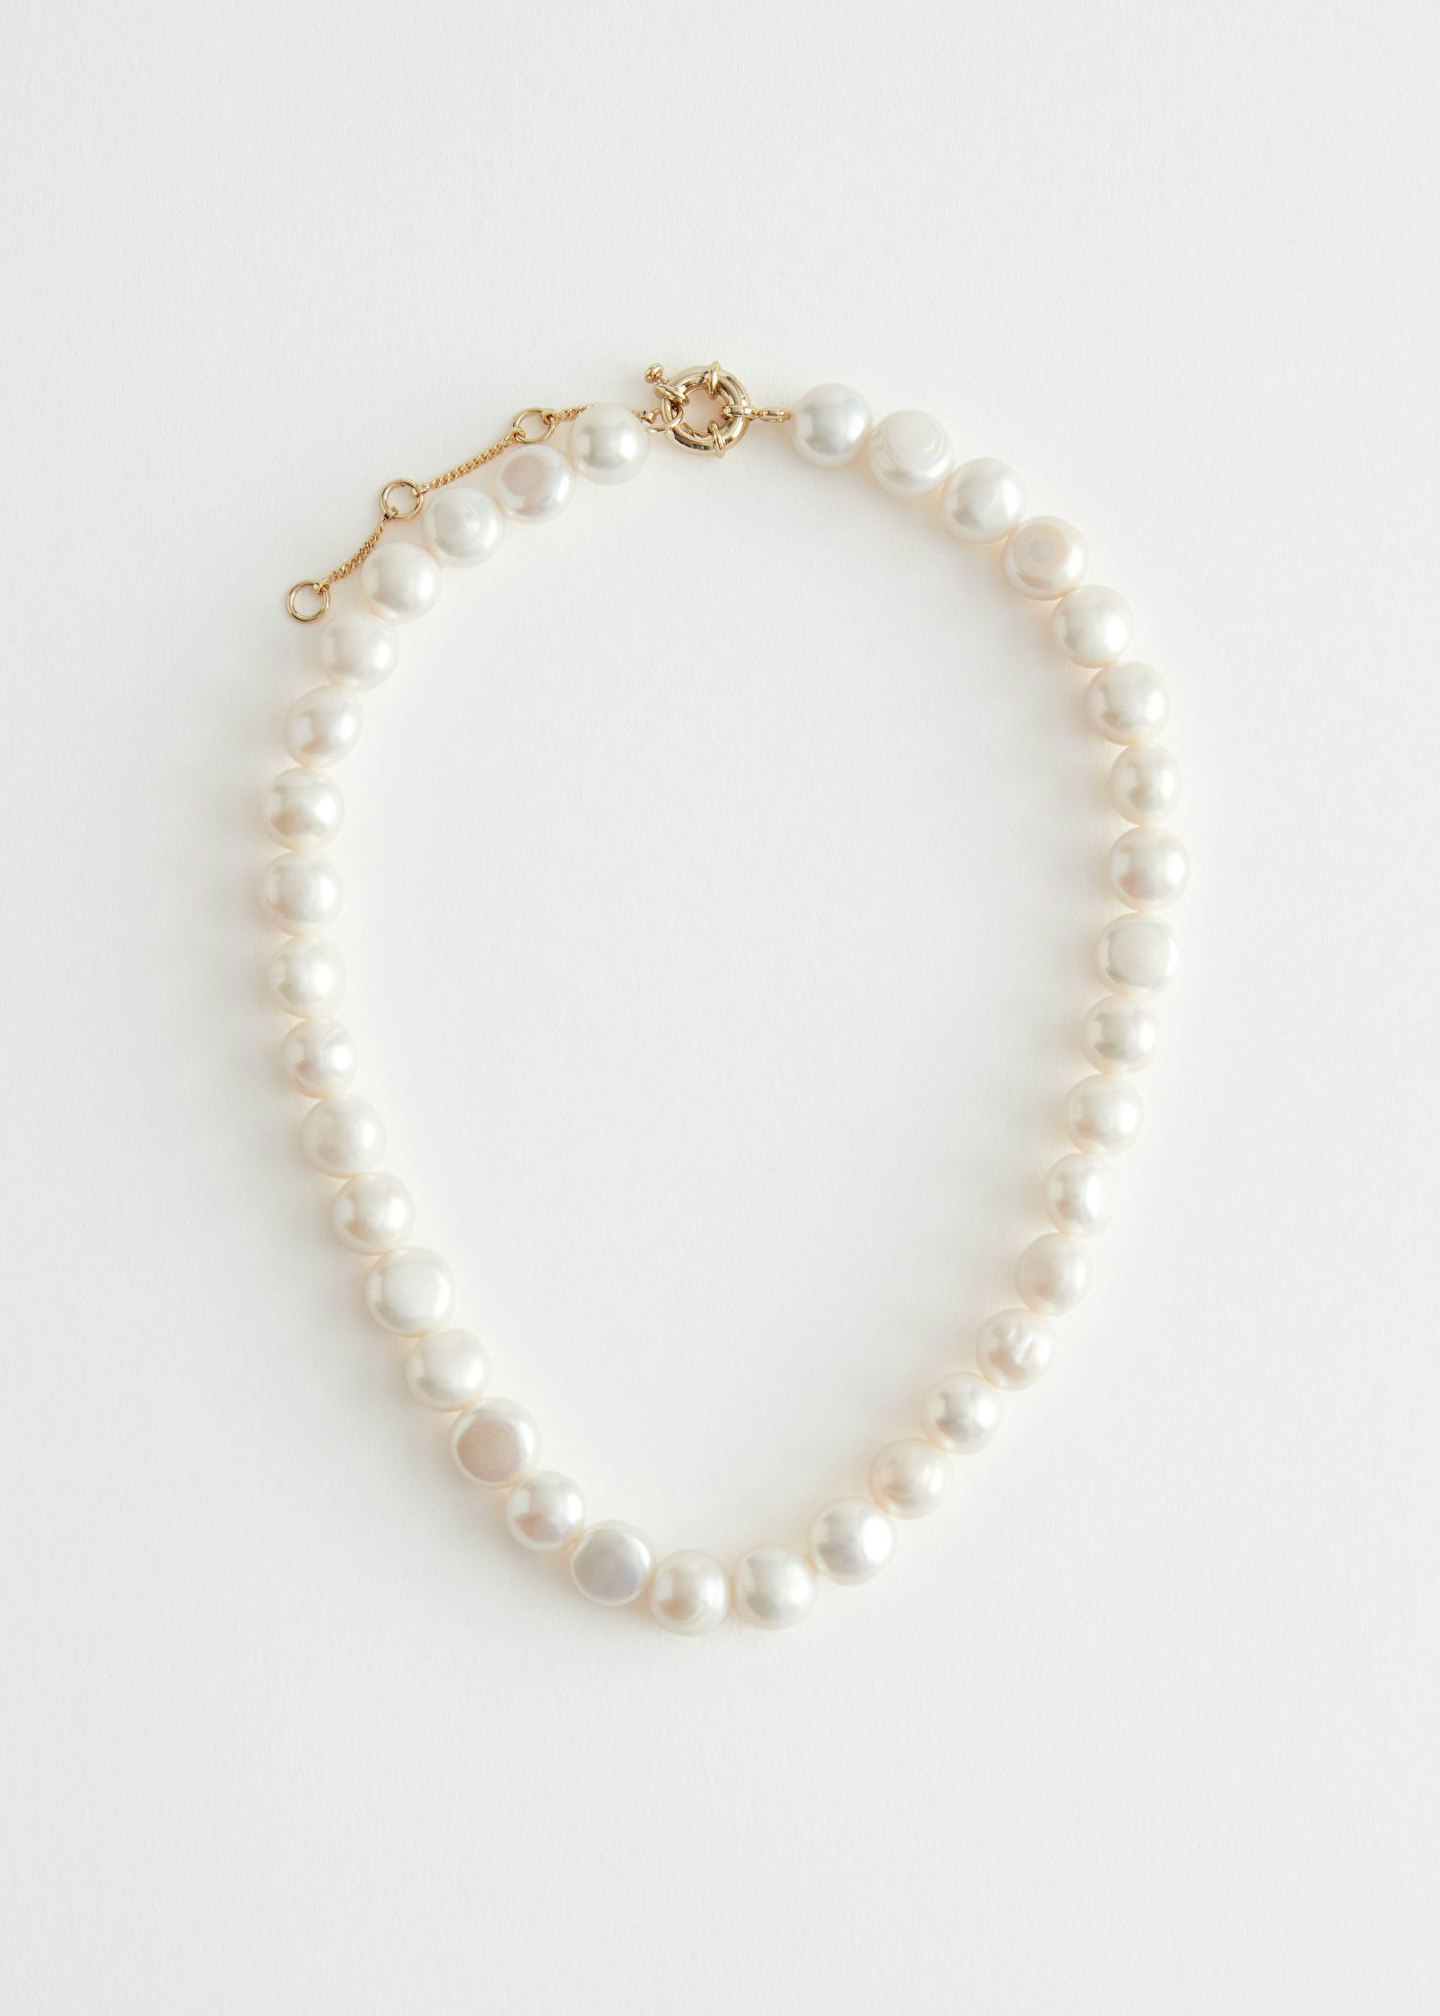 & Other Stories, Delicate Pearl Necklace